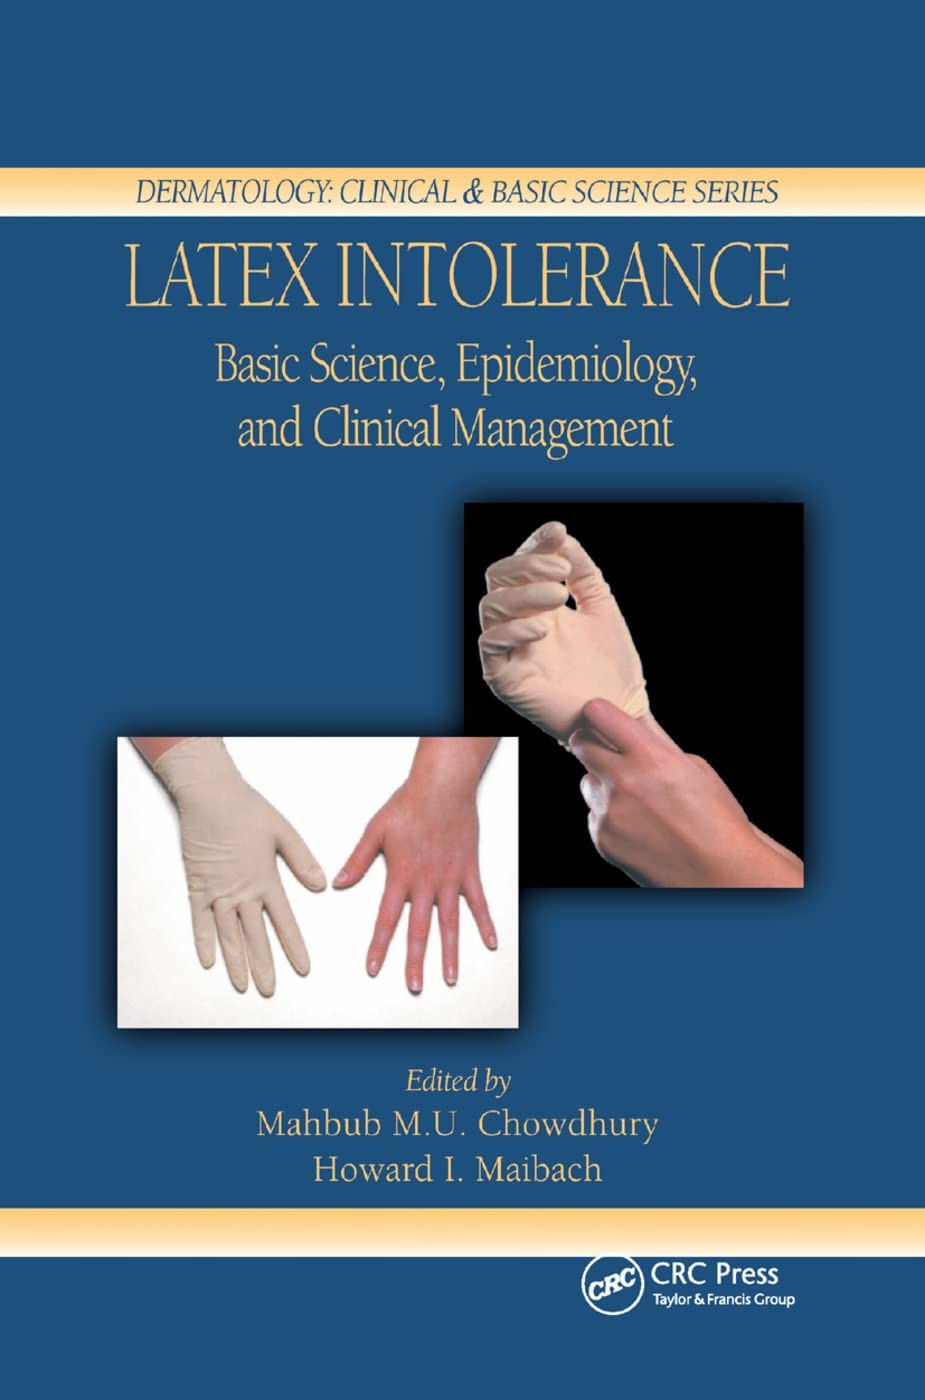 LaTeX Intolerance: Basic Science, Epidemiology, and Clinical Management